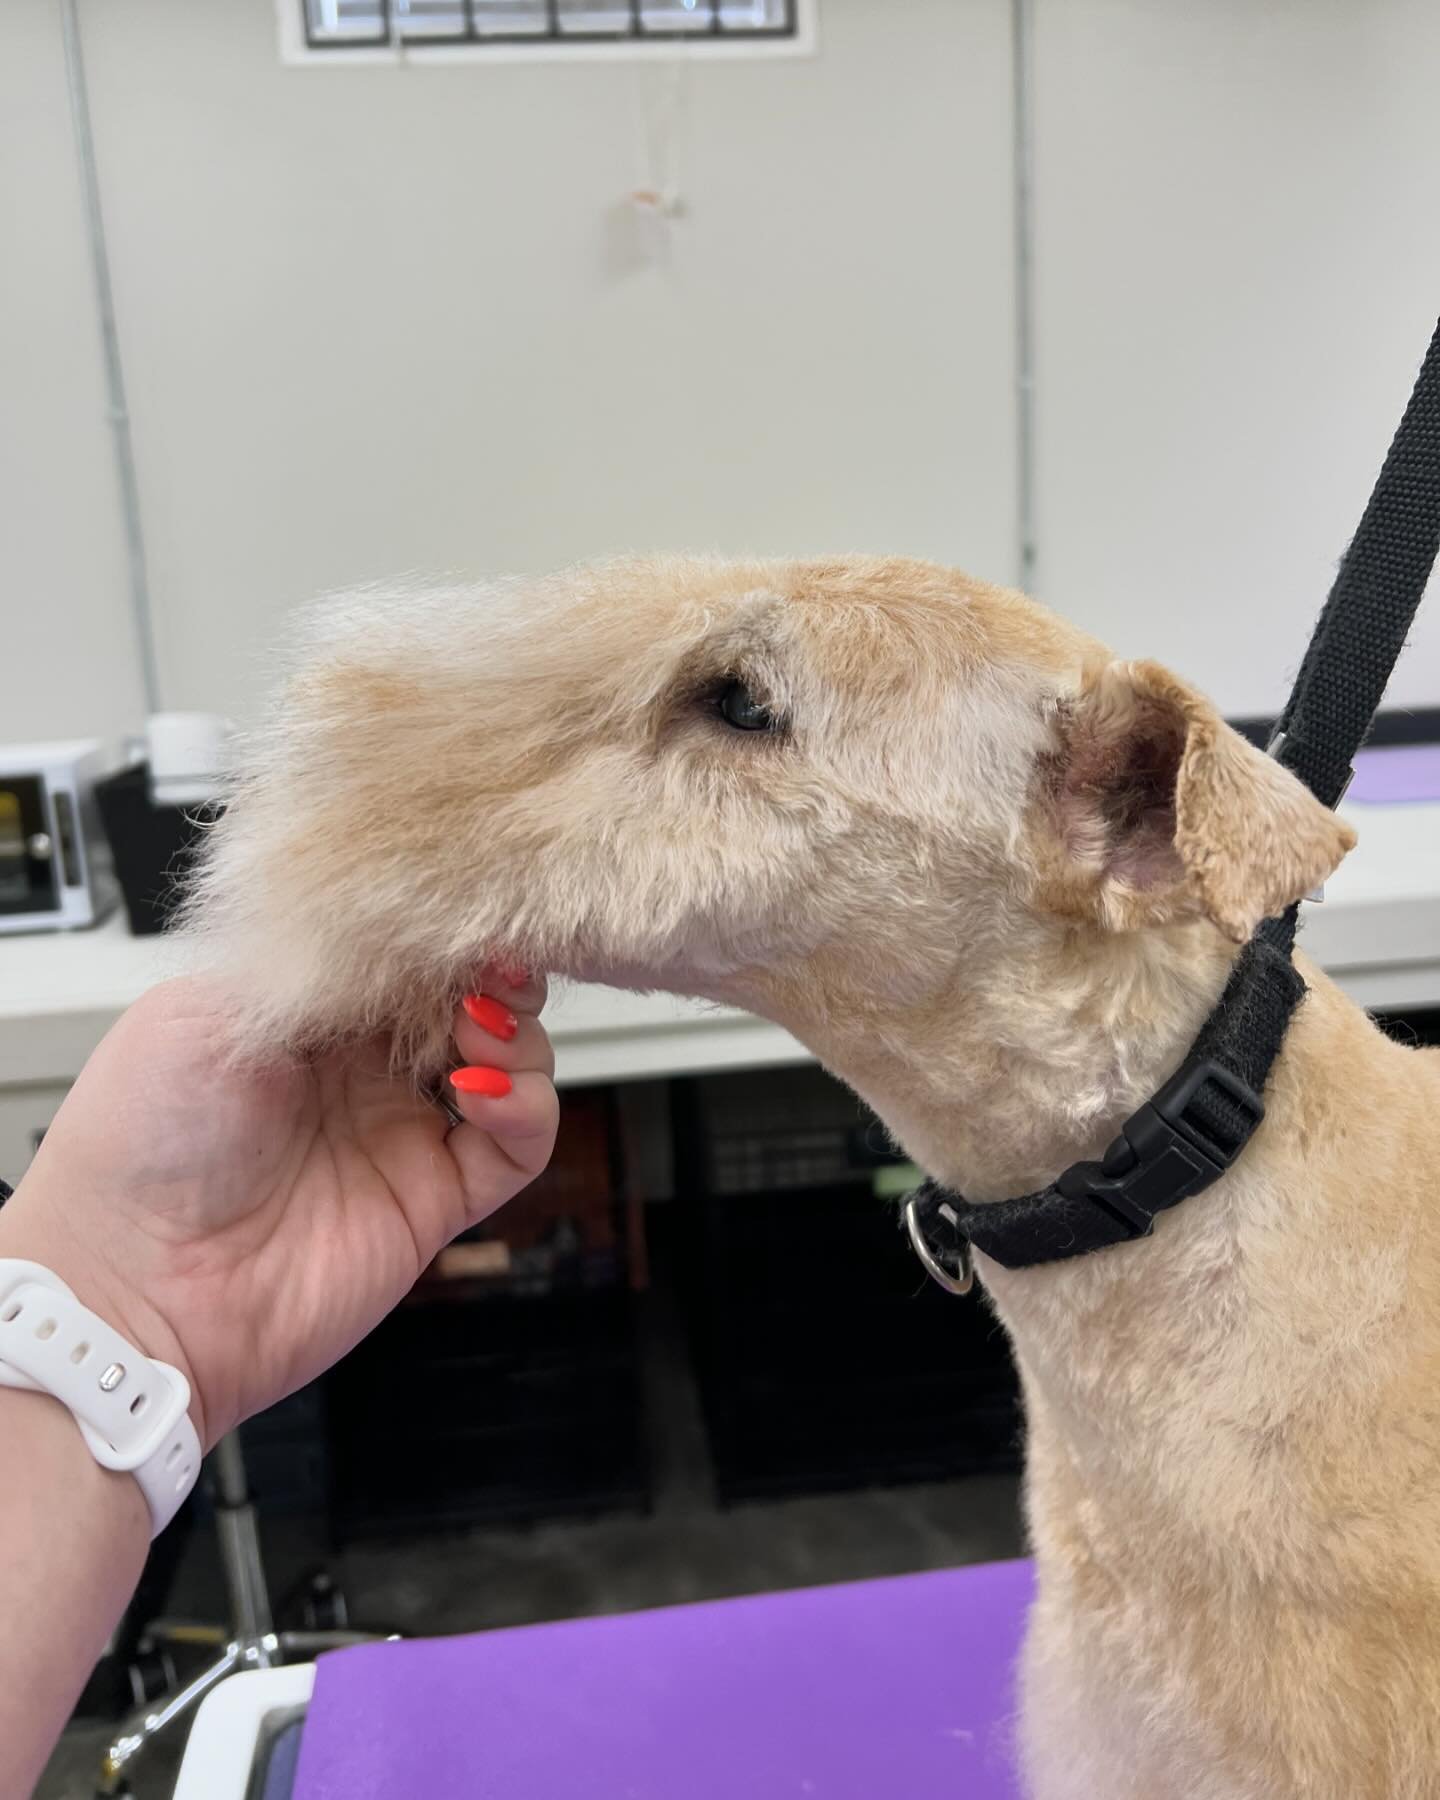 🌱Terriers&hellip;

🌱practice makes perfect, it&rsquo;s so satisfying when a head starts coming together. 

#lakelandterrier #terrier #breedstandard #goodboy #practicemakesperfect #foreverlearning #clt #704 #akc #doggrooming #dogsofcharlotte #charlo